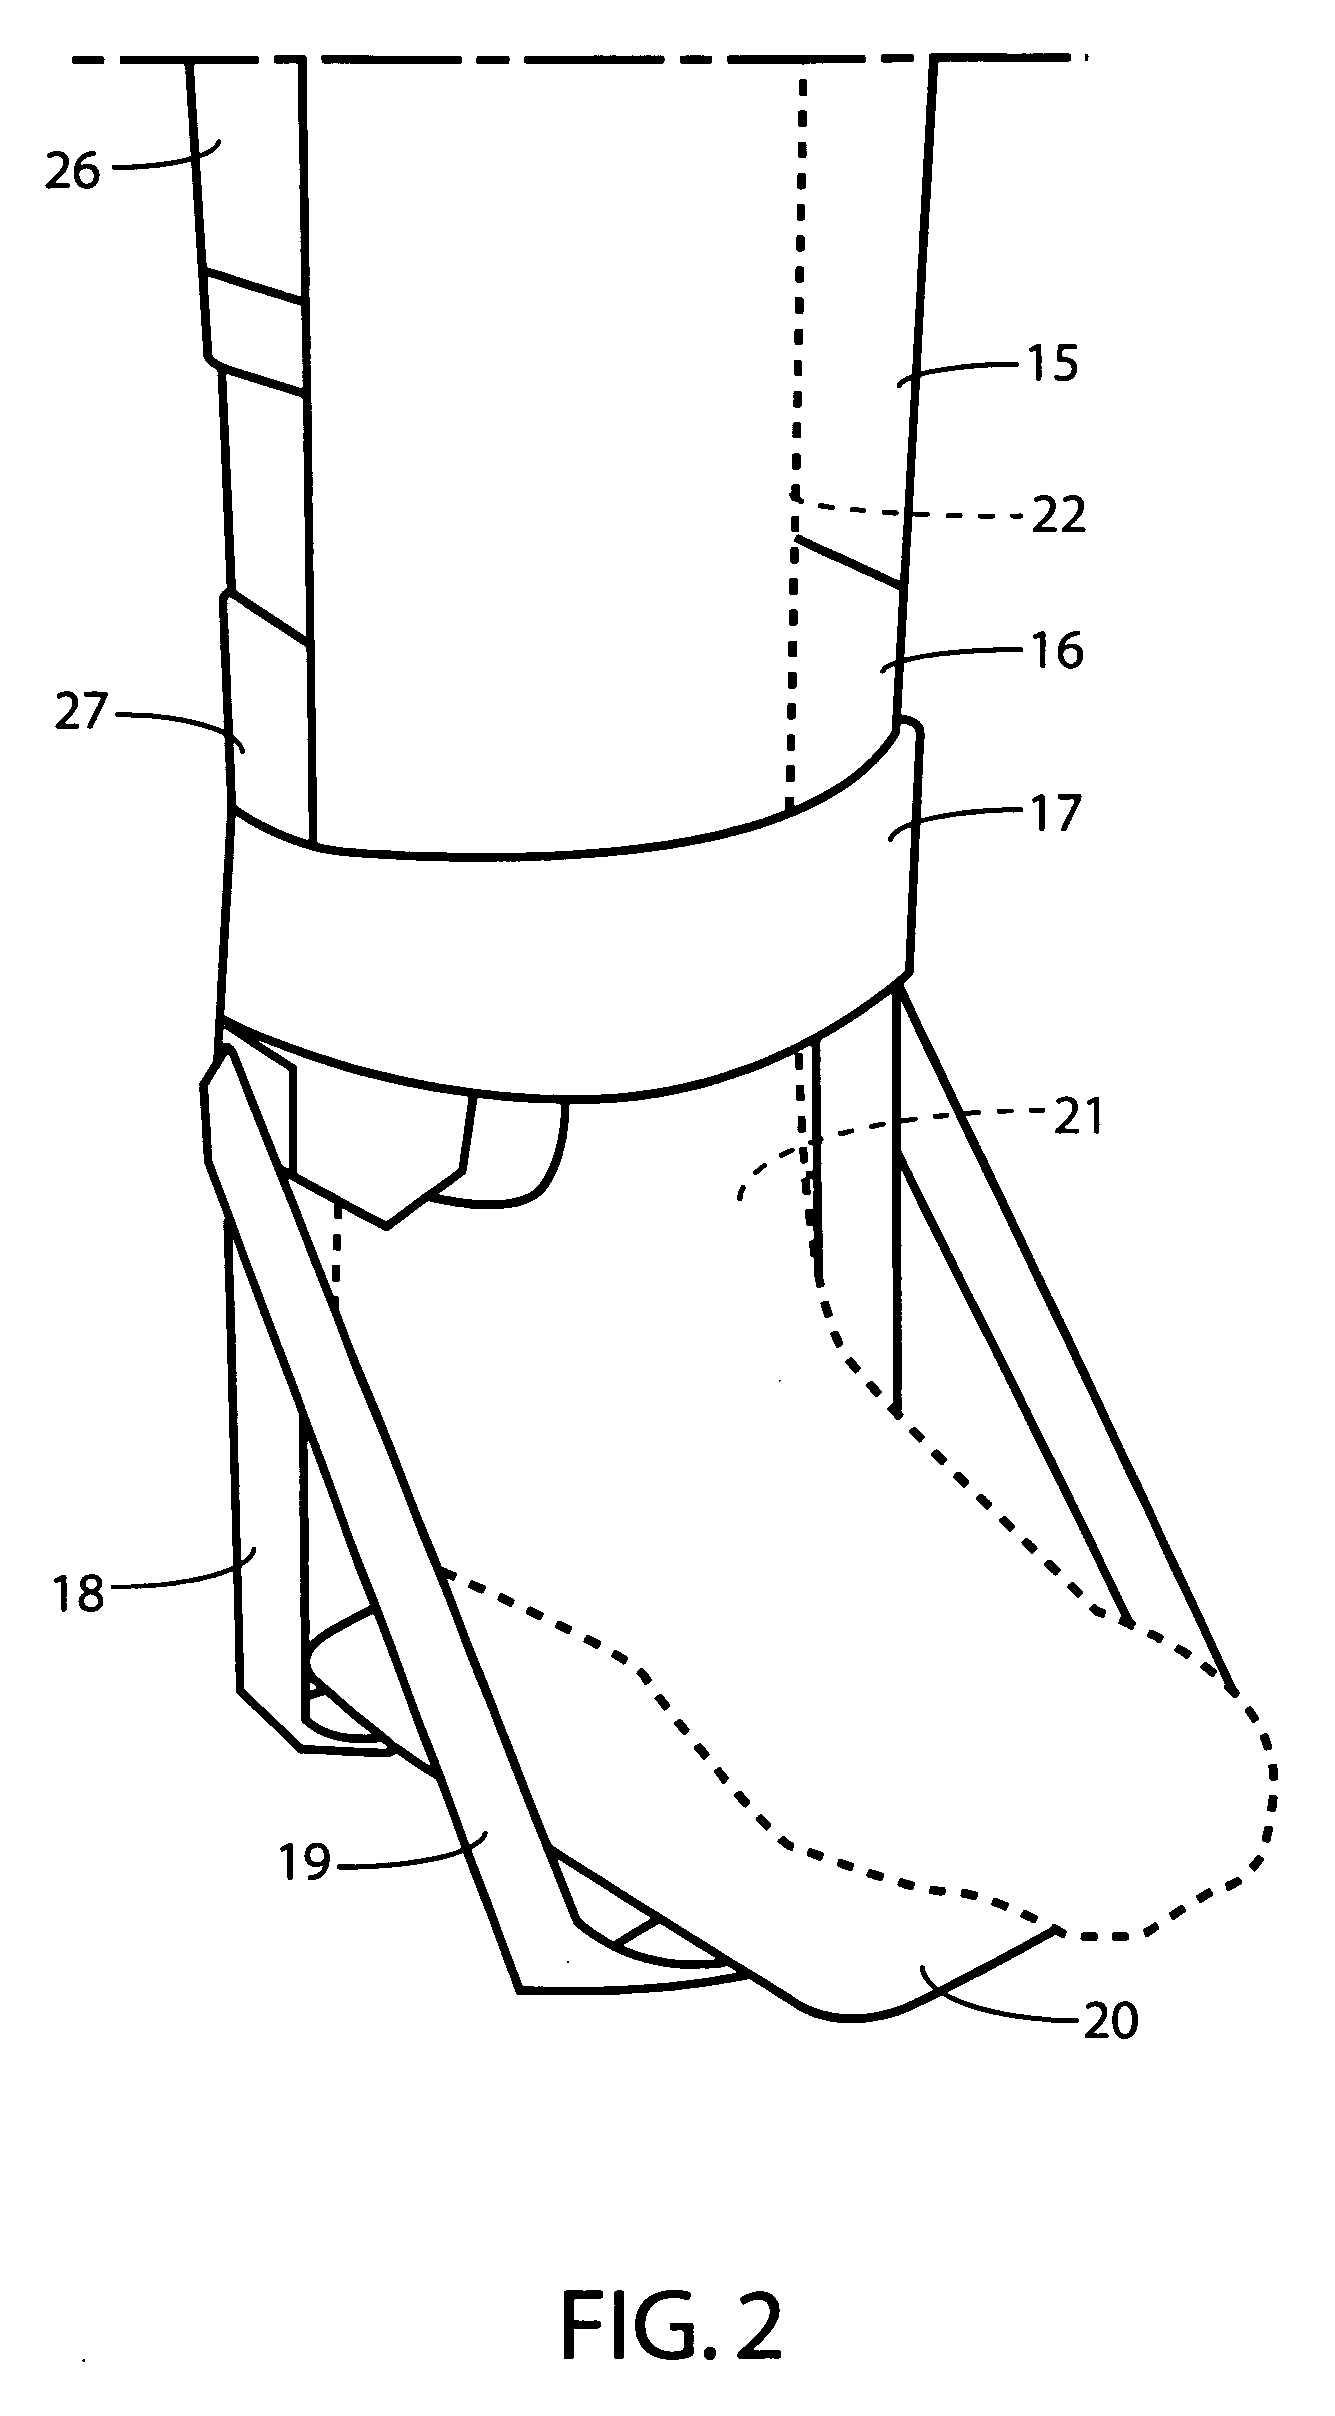 Apparatus for isolating an injured ankle or foot during aerobic exercise